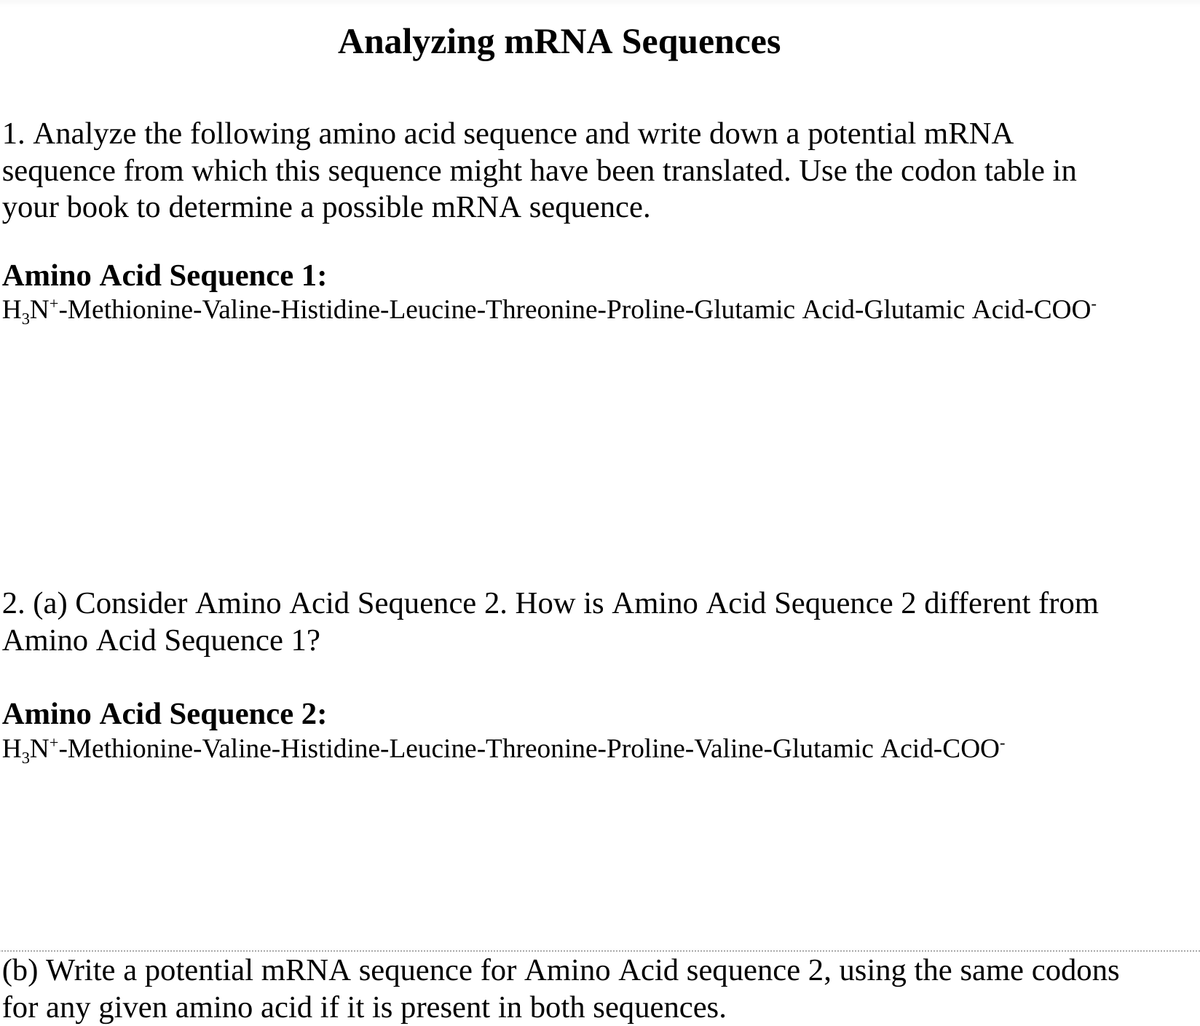 Analyzing mRNA Sequences
1. Analyze the following amino acid sequence and write down a potential mRNA
sequence from which this sequence might have been translated. Use the codon table in
your book to determine a possible mRNA sequence.
Amino Acid Sequence 1:
H,N*-Methionine-Valine-Histidine-Leucine-Threonine-Proline-Glutamic Acid-Glutamic Acid-COO-
2. (a) Consider Amino Acid Sequence 2. How is Amino Acid Sequence 2 different from
Amino Acid Sequence 1?
Amino Acid Sequence 2:
H,N*-Methionine-Valine-Histidine-Leucine-Threonine-Proline-Valine-Glutamic Acid-COO-
(b) Write a potential mRNA sequence for Amino Acid sequence 2, using the same codons
for any given amino acid if it is present in both sequences.
